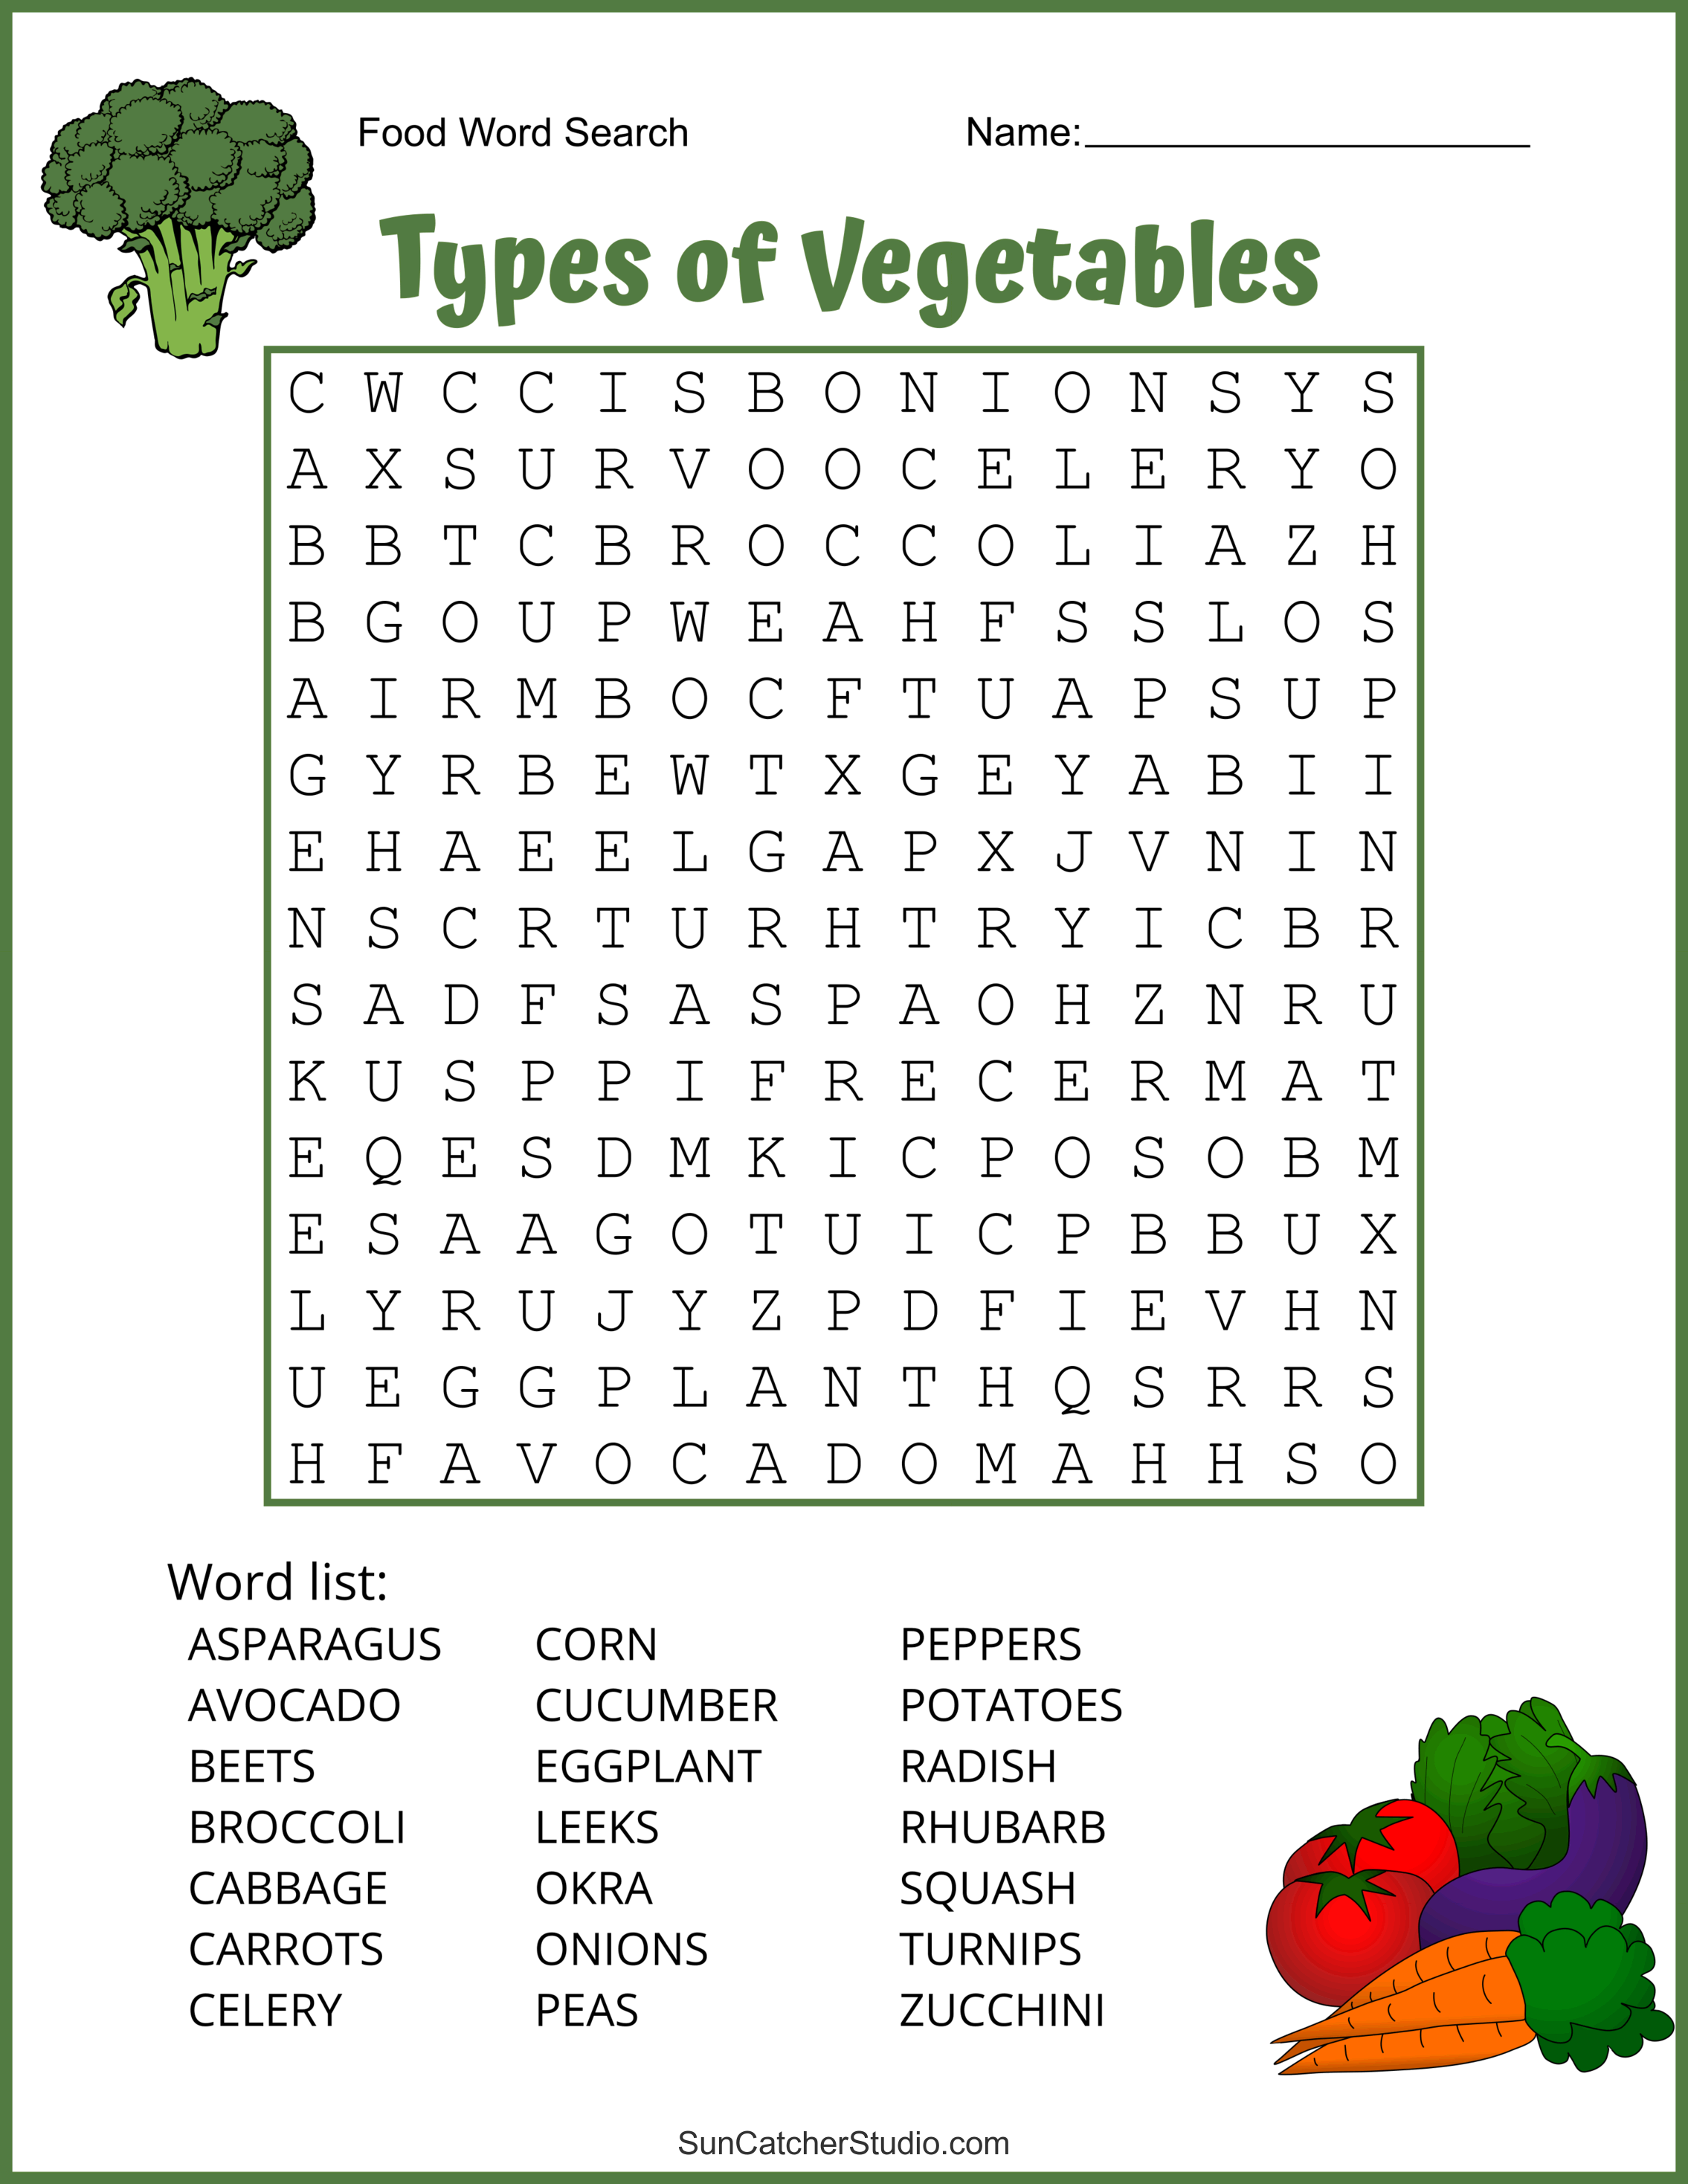 Food Word Search (Free Printable Puzzles) DIY Projects Patterns